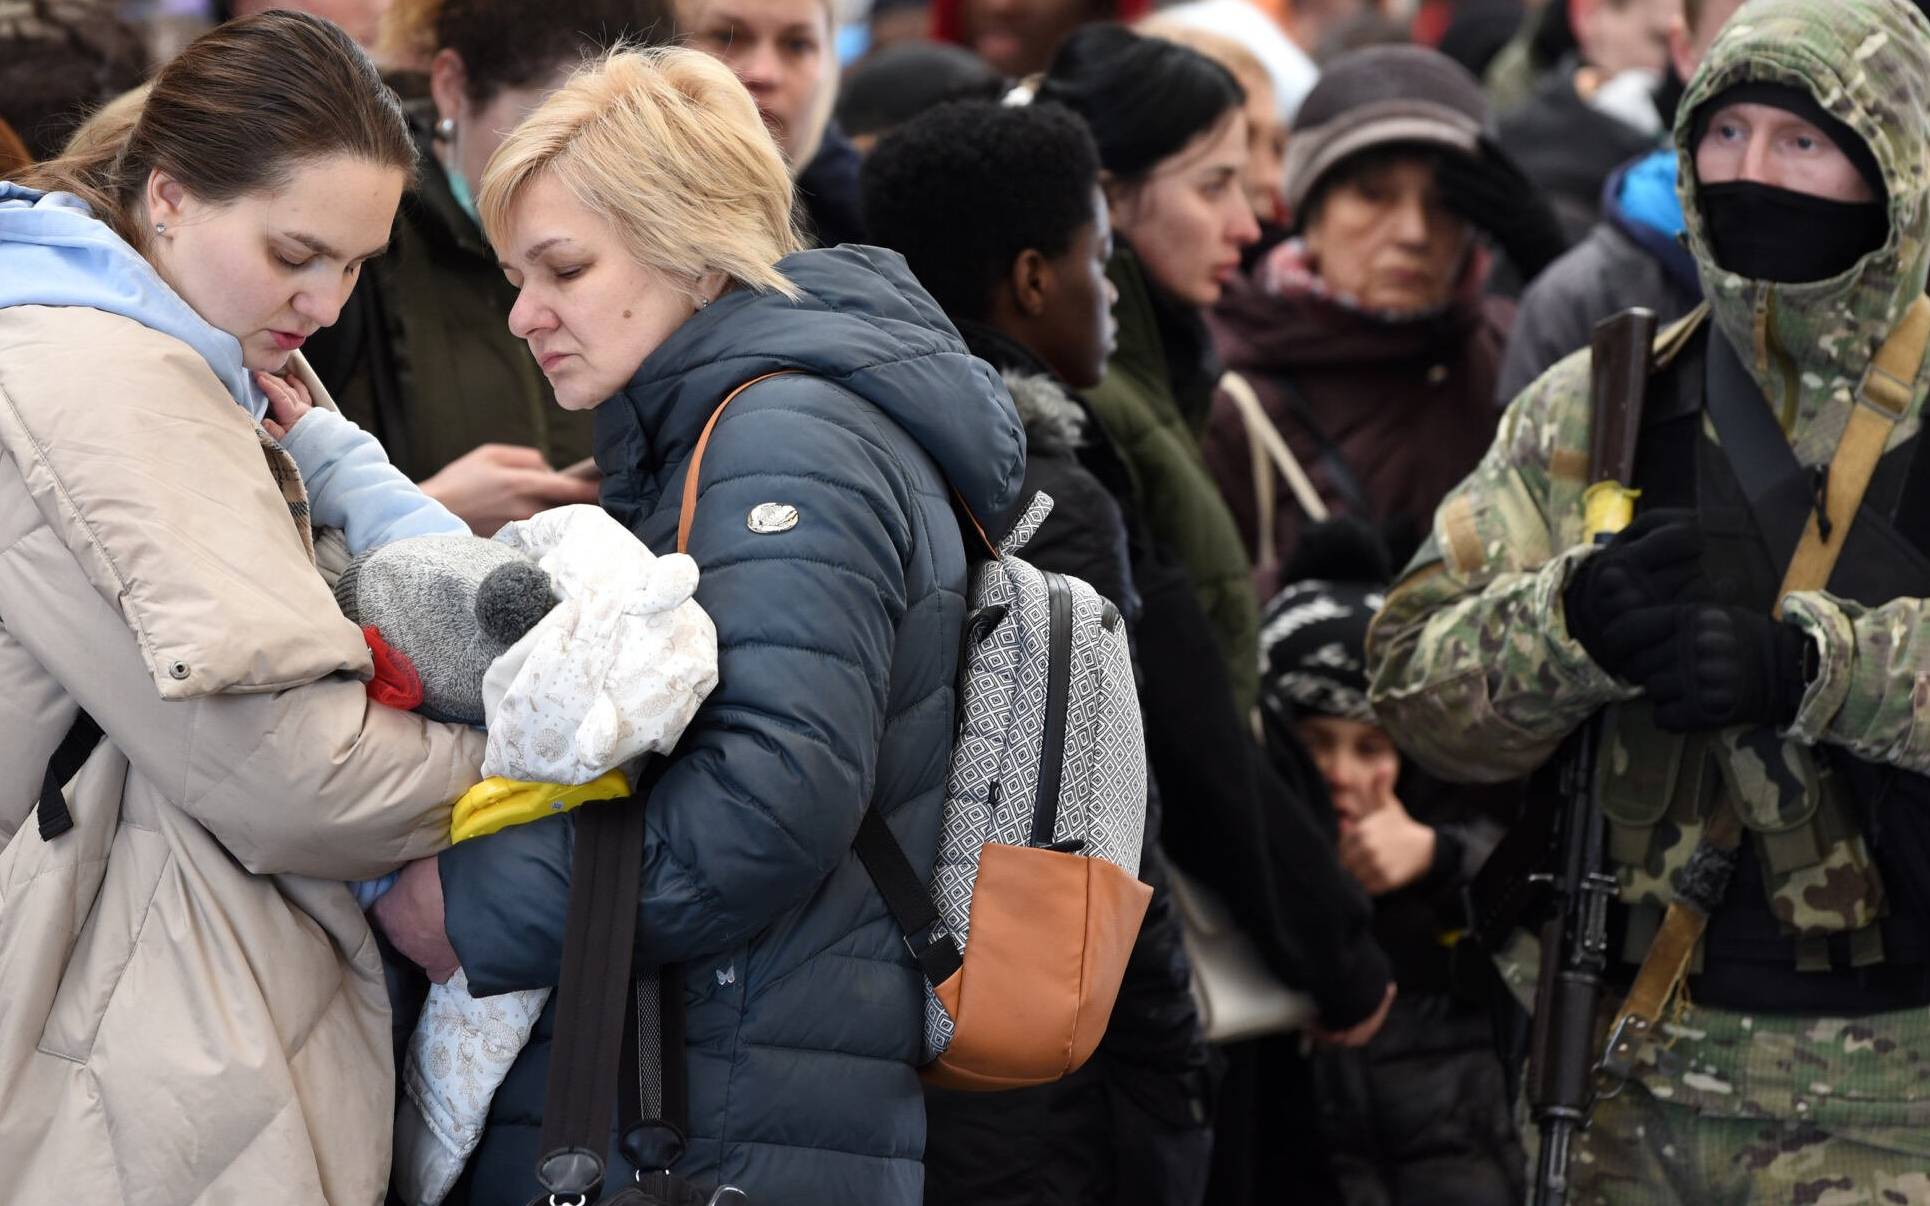 People wait for a train to Poland at the railway station of the western Ukrainian city of Lviv on February 26, 2022. - Ukrainian forces repulsed a Russian attack on Kyiv but "sabotage groups" infiltrated the capital, officials said on February 26 as Ukraine reported 198 civilians killed in Russia's invasion so far. A defiant Ukrainian President Volodymyr Zelensky vowed his pro-Western country would never give in to the Kremlin even as Russia said it had fired cruise missiles at military targets. (Photo by Yuriy Dyachyshyn / AFP)